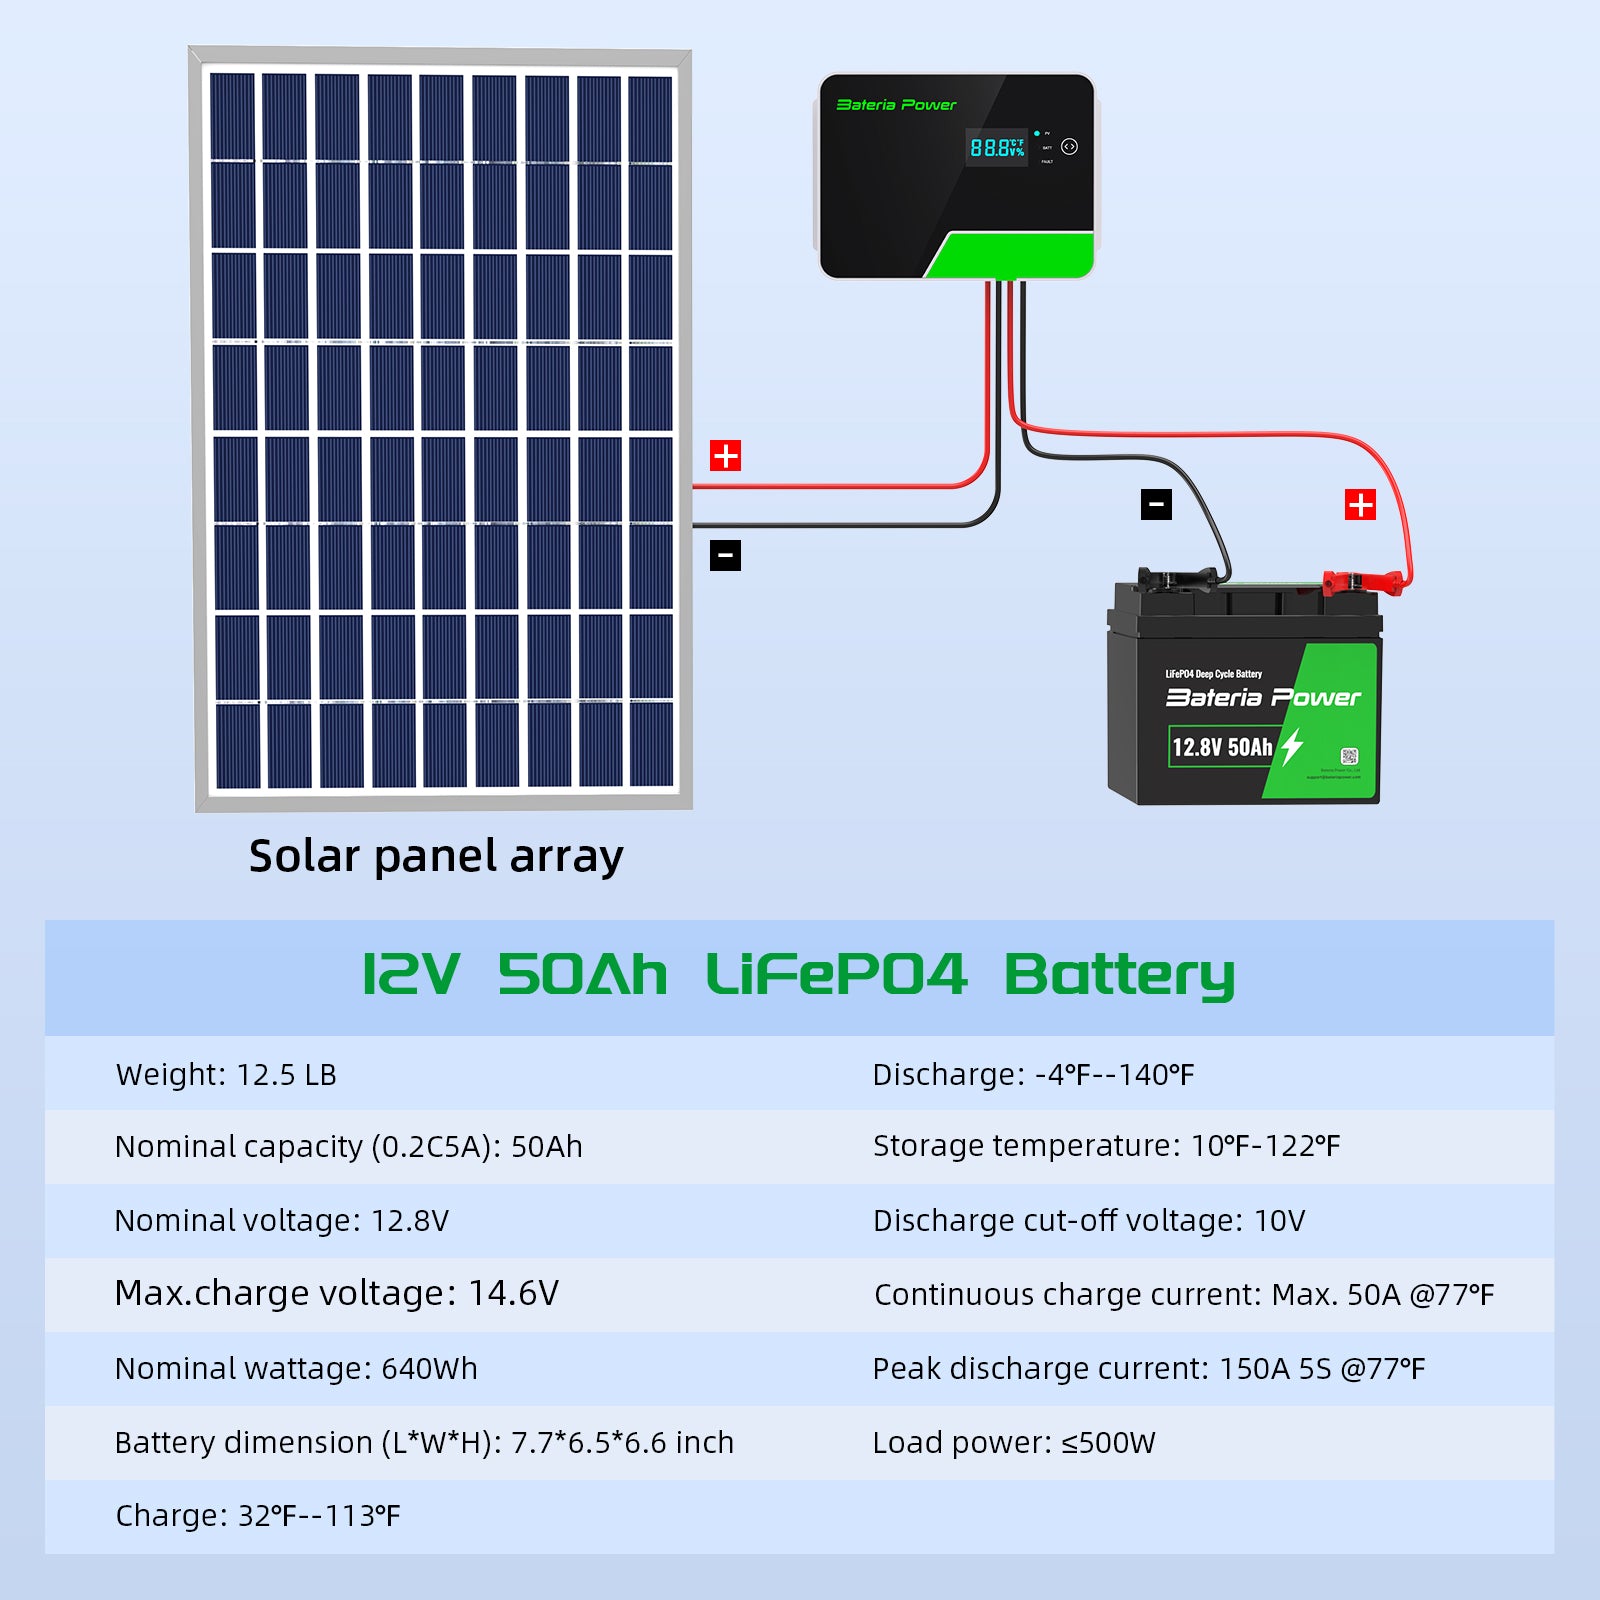 12V 50AH Lithium Battery,5000+ Deep Cycle LiFePO4 Battery with Built-in 50A BMS